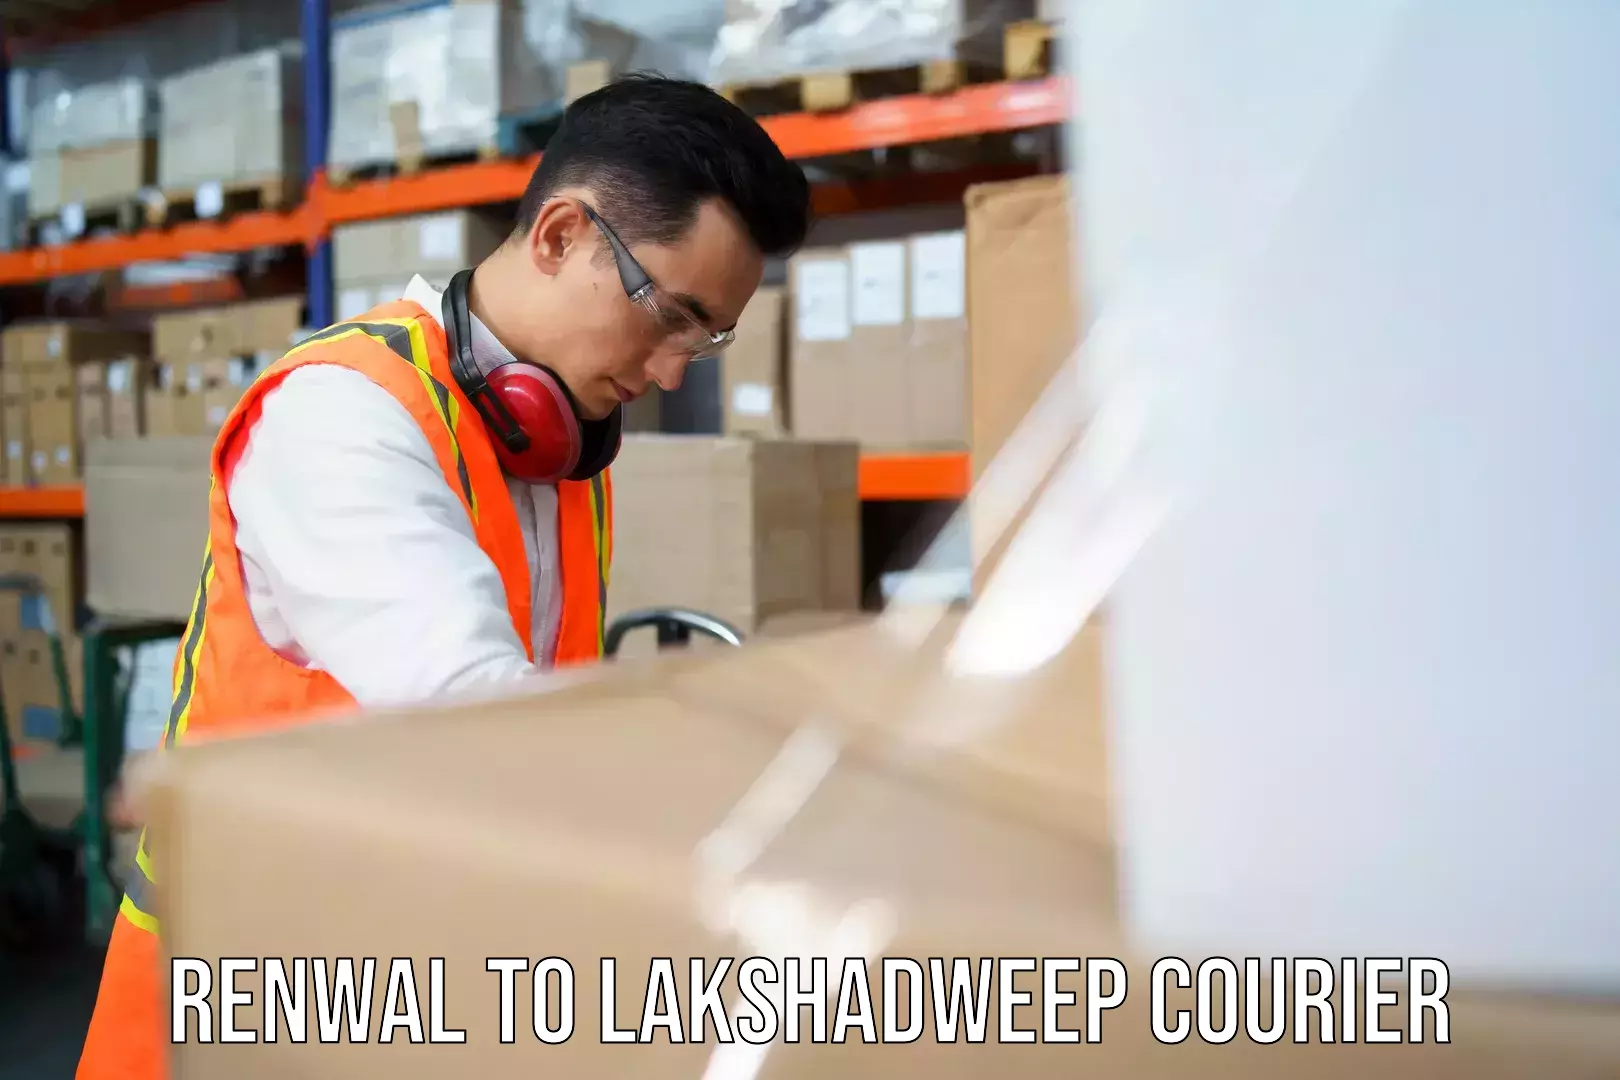 Cargo delivery service Renwal to Lakshadweep